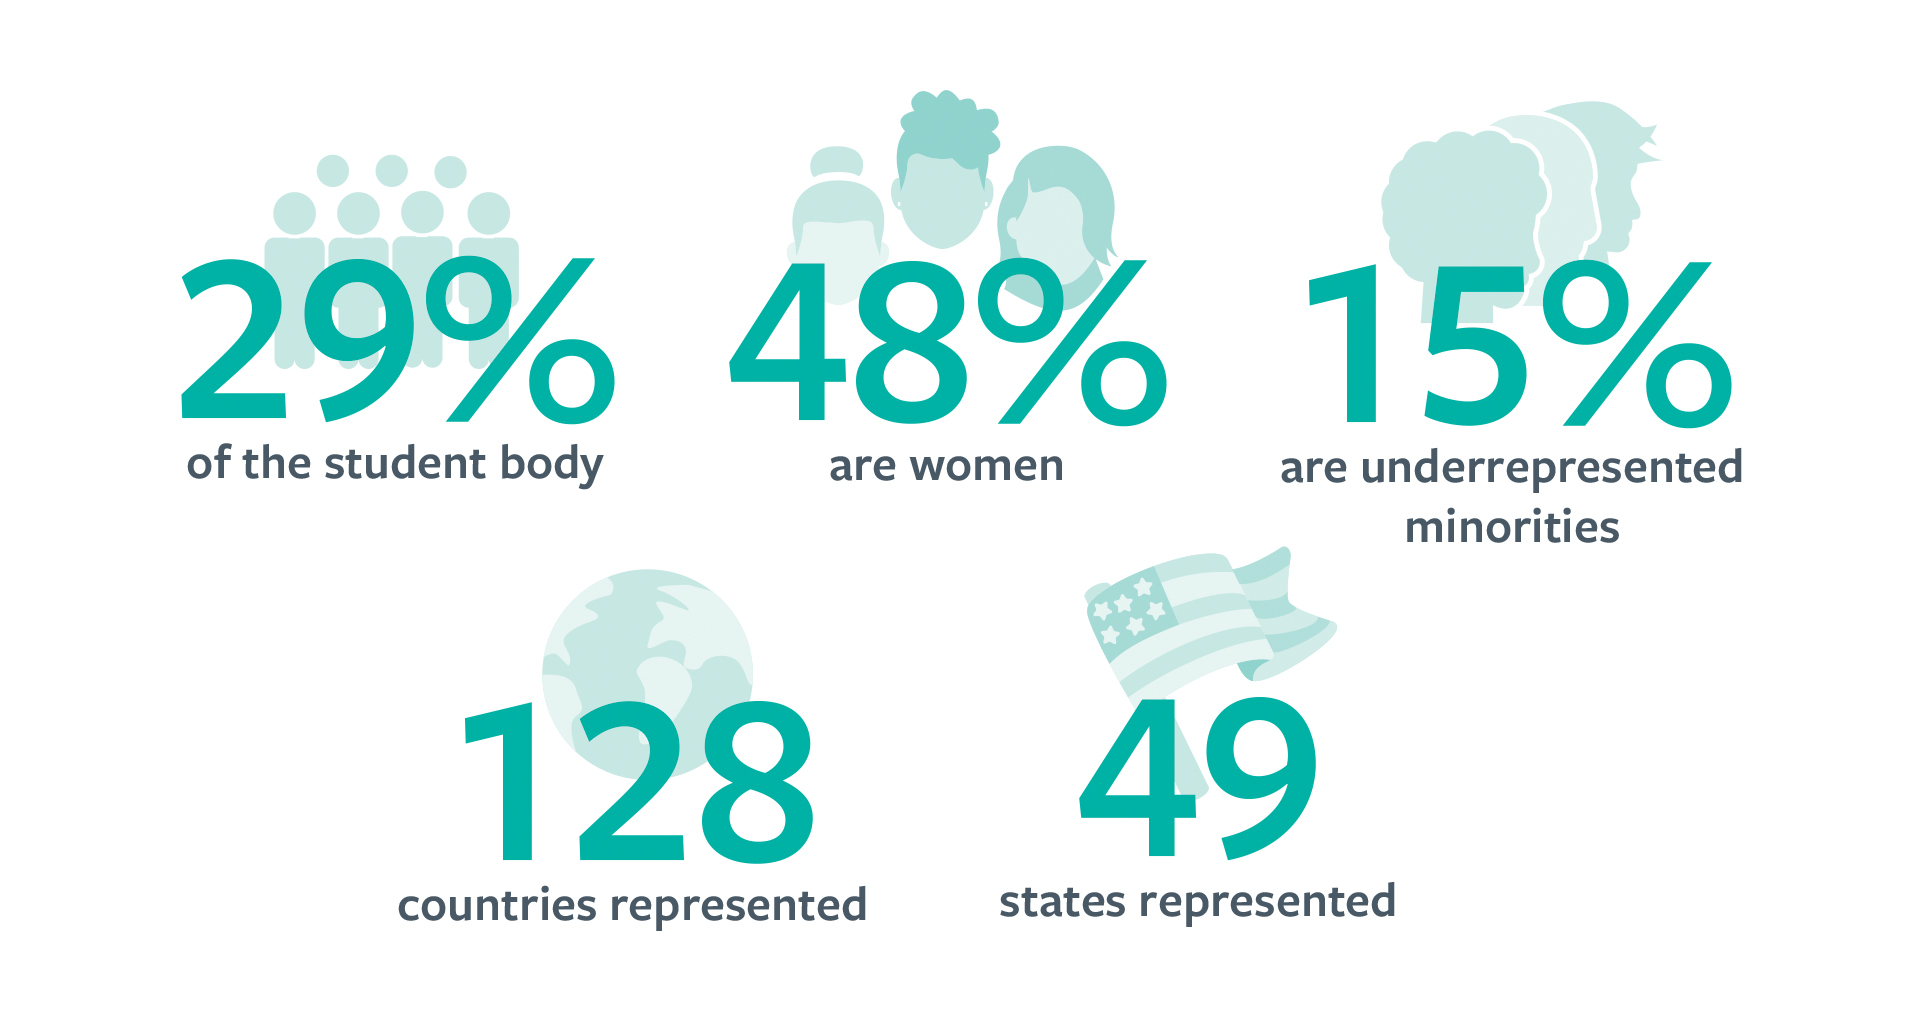 A graphic on graduate students: 29% of the student body, 48% are women, and 15% are underrepresented minorities. They represent 128 countries and 49 states.